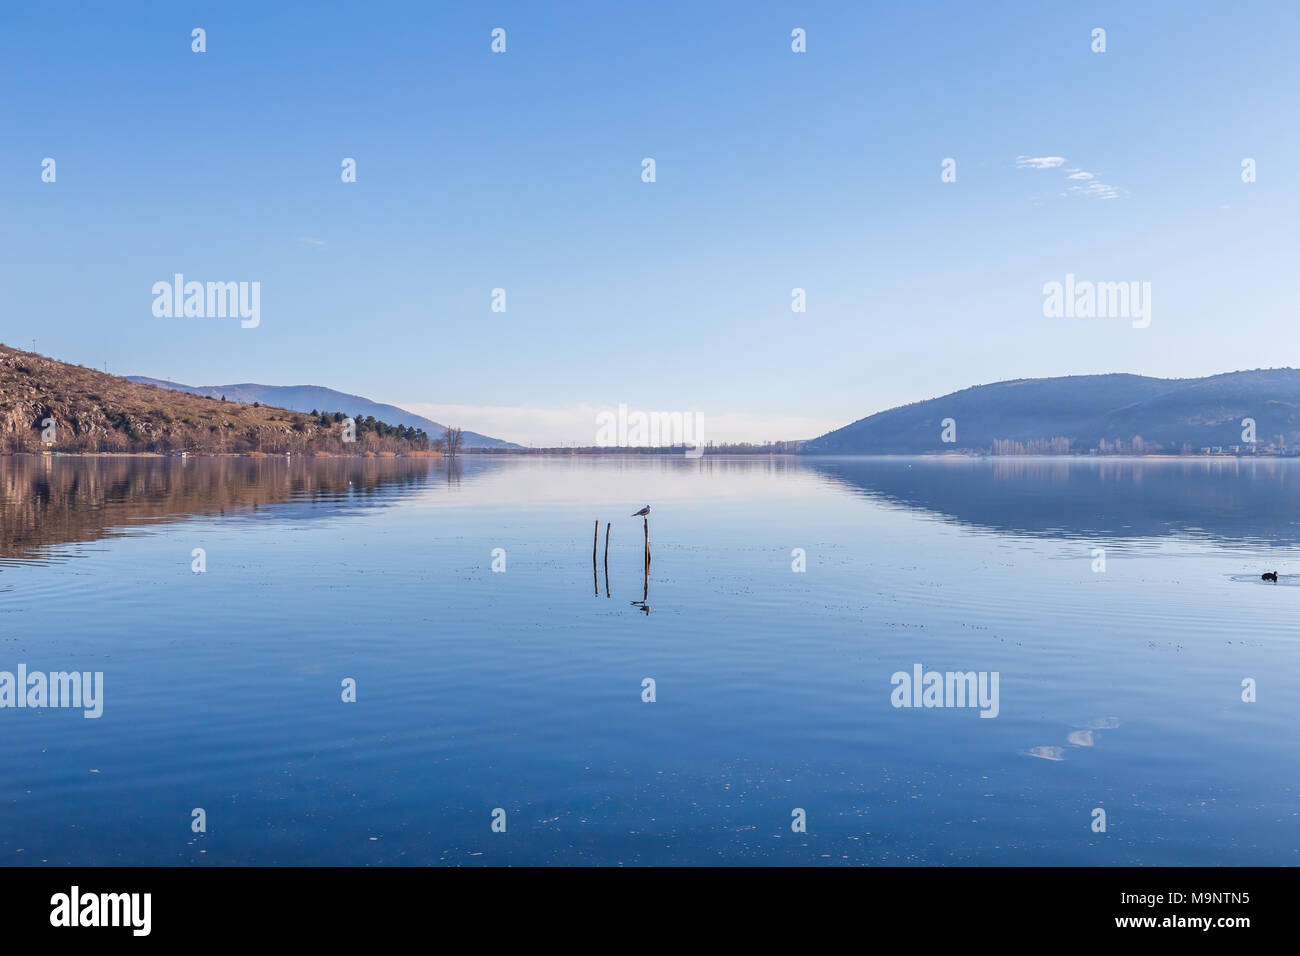 Lake of Kastoria in Greece. Wildlife and calm waters with reflections Stock Photo